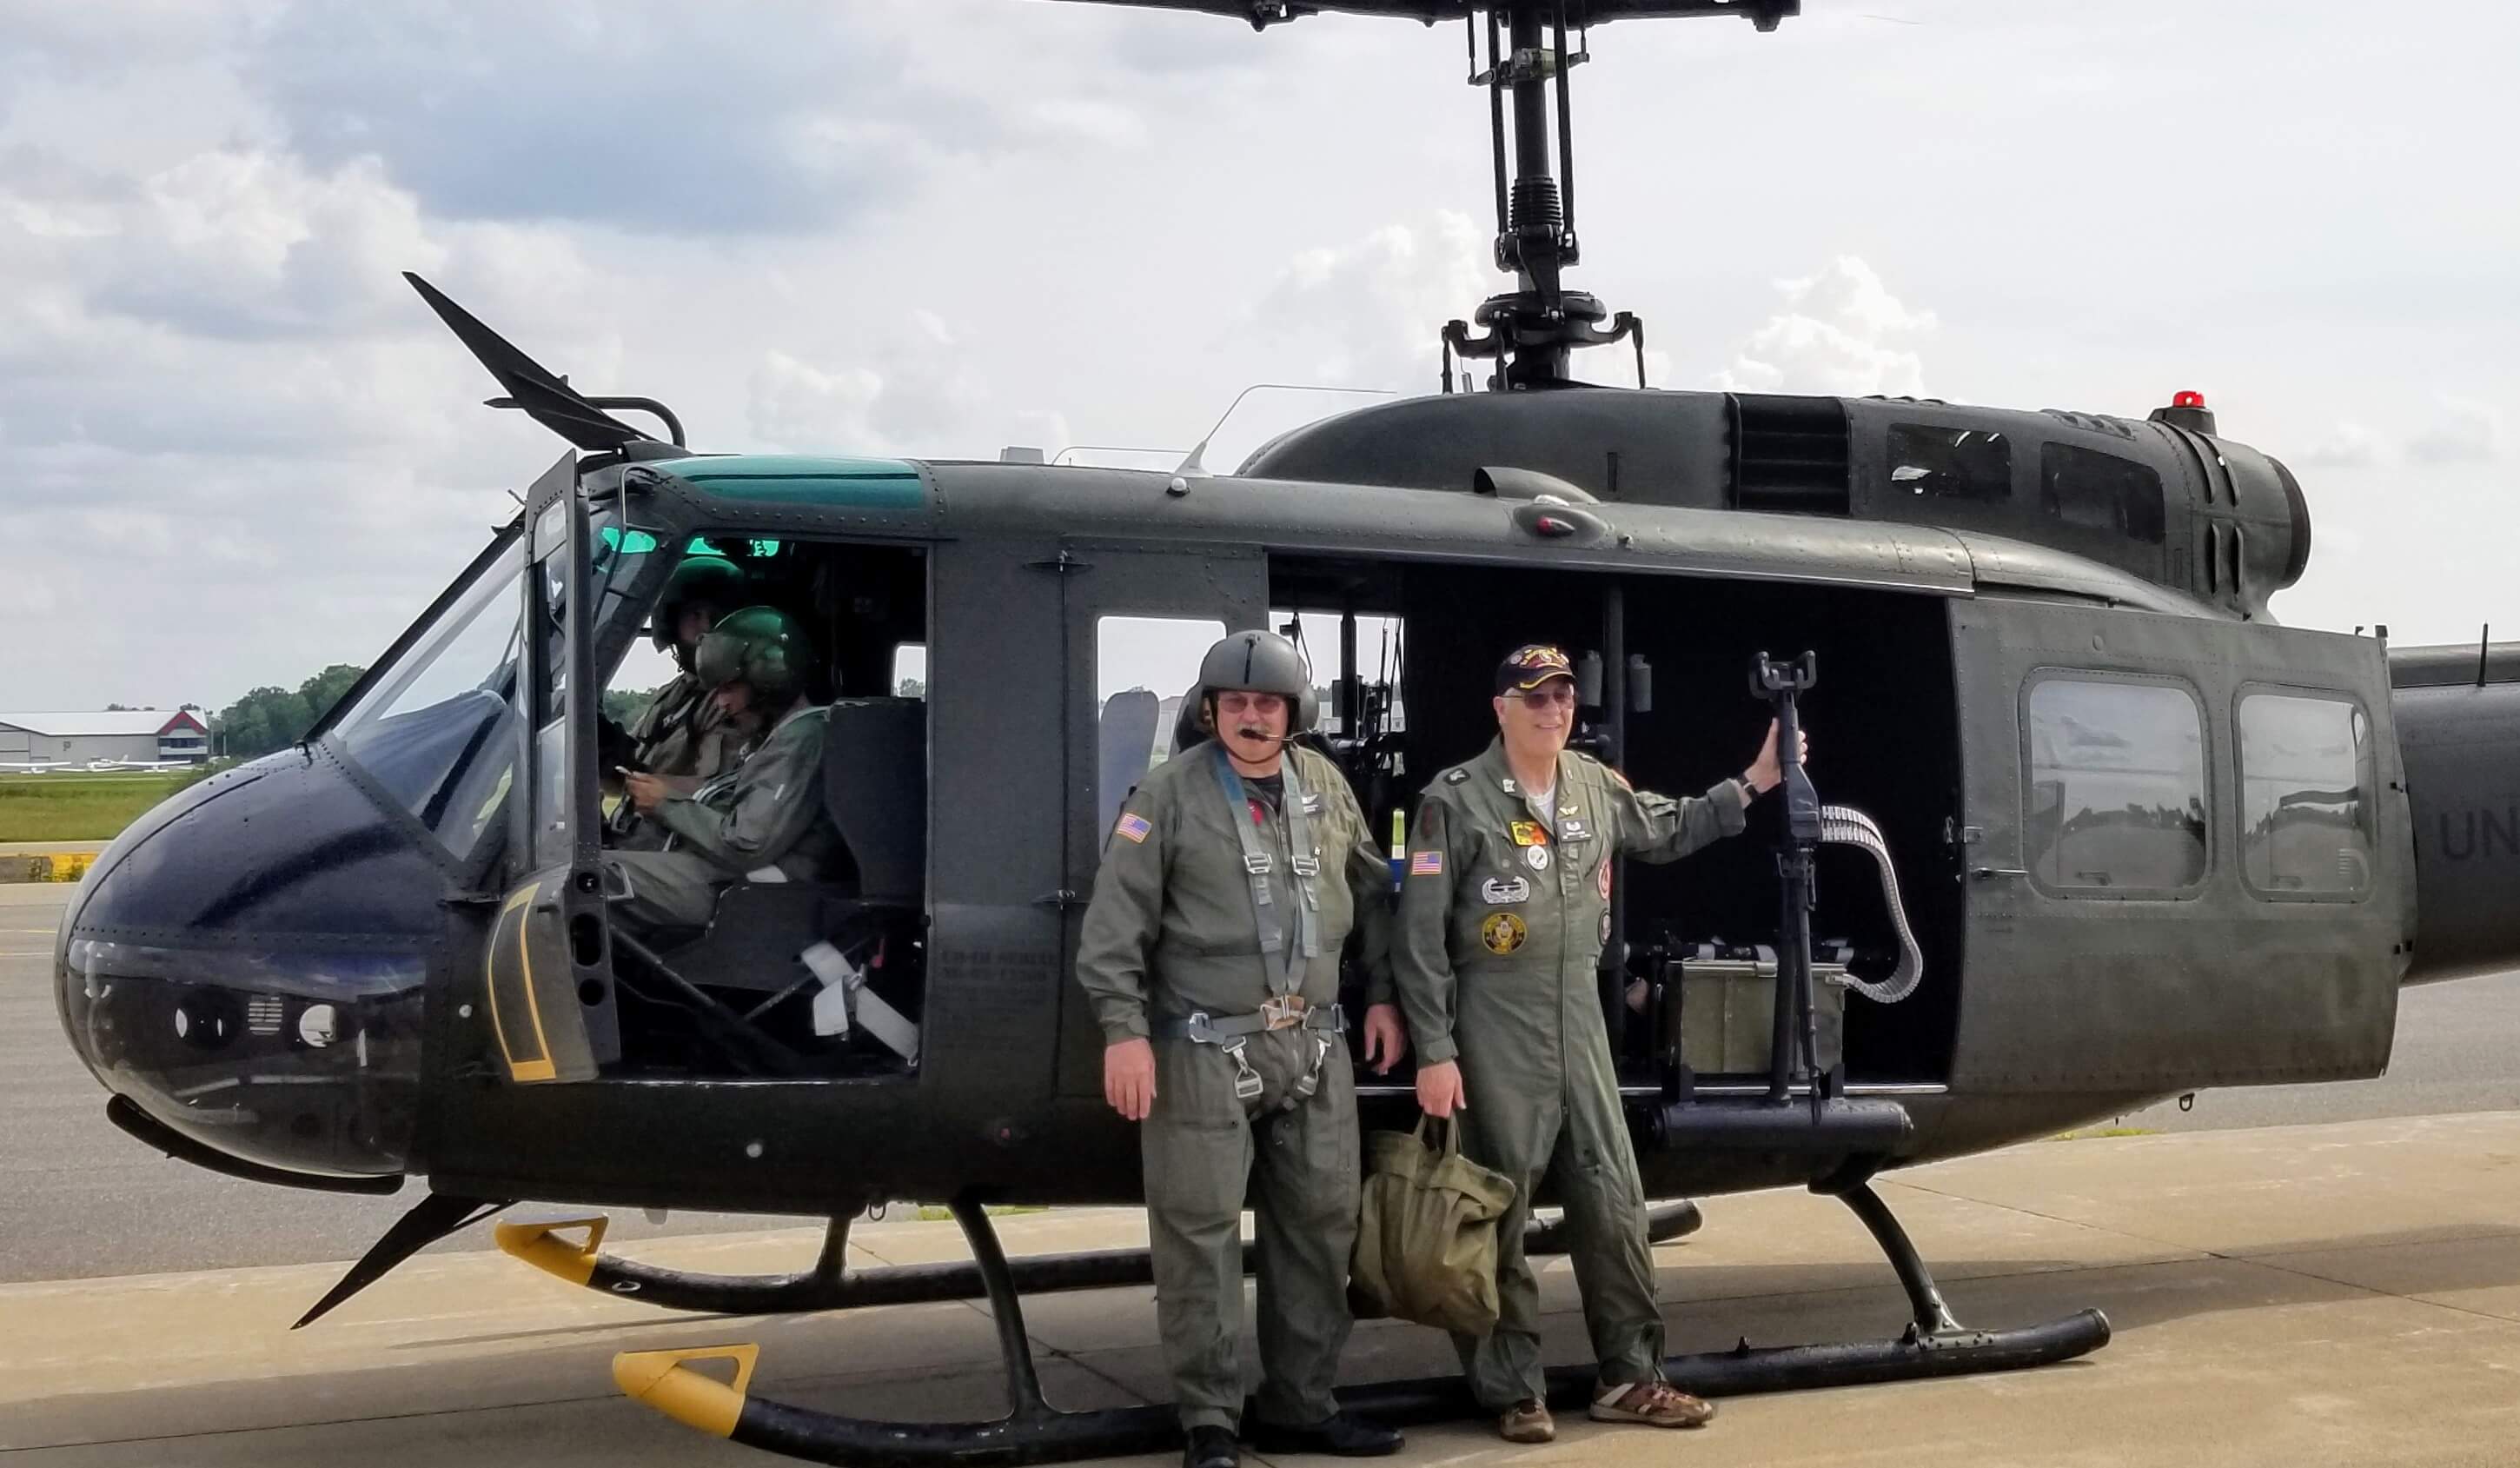 Men in front of a vintage Huey Helicopter